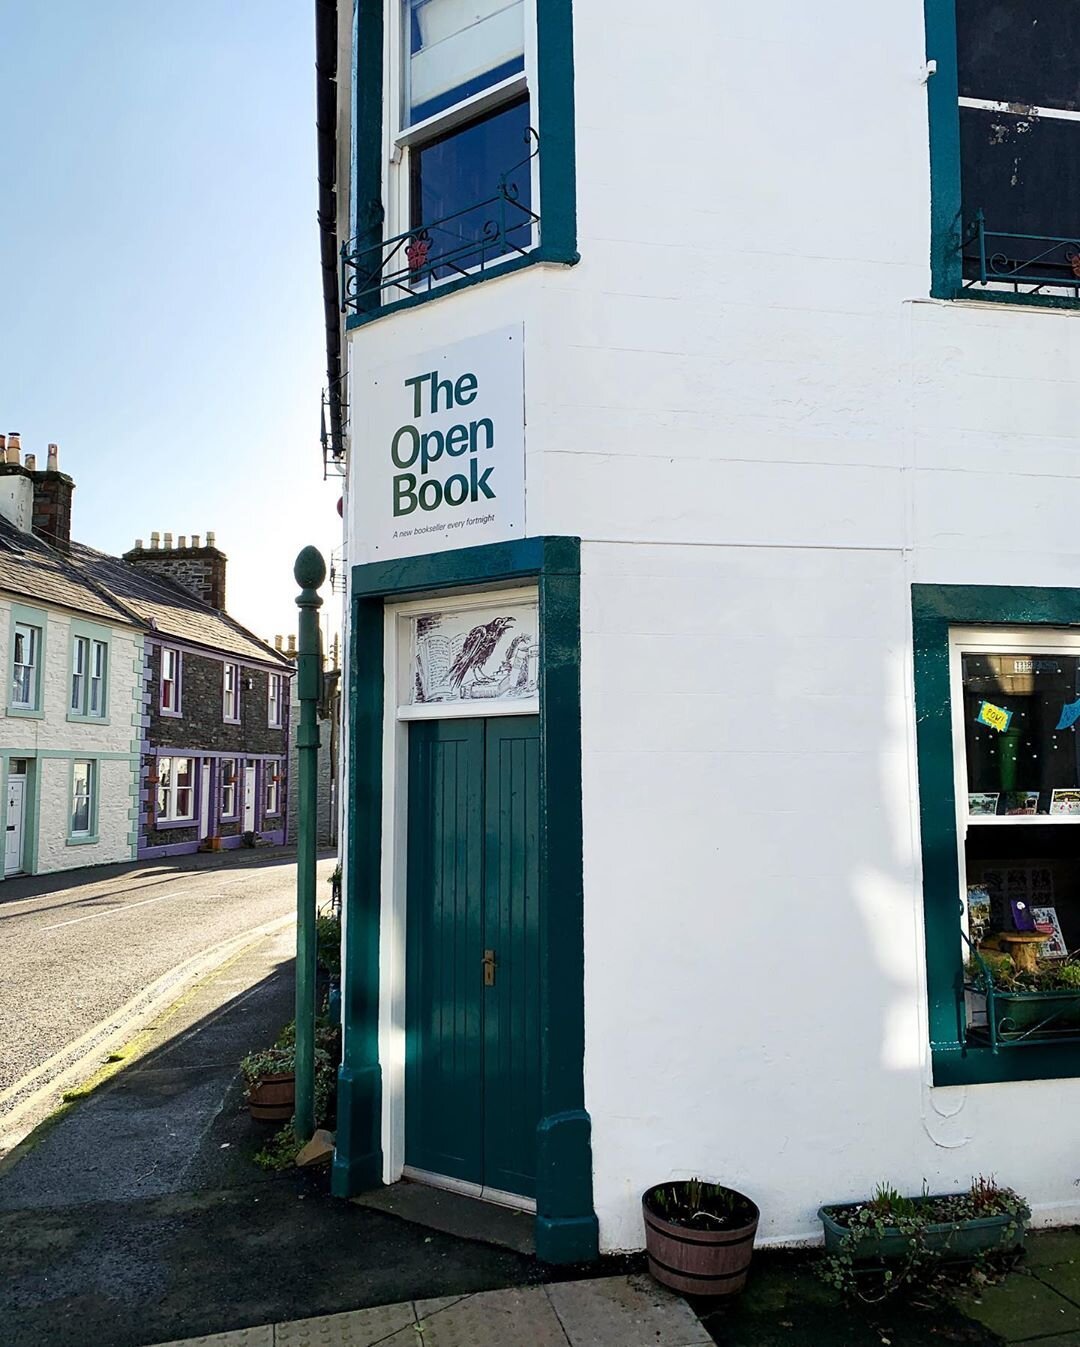 The first ever bookshop Airbnb, The Open Book